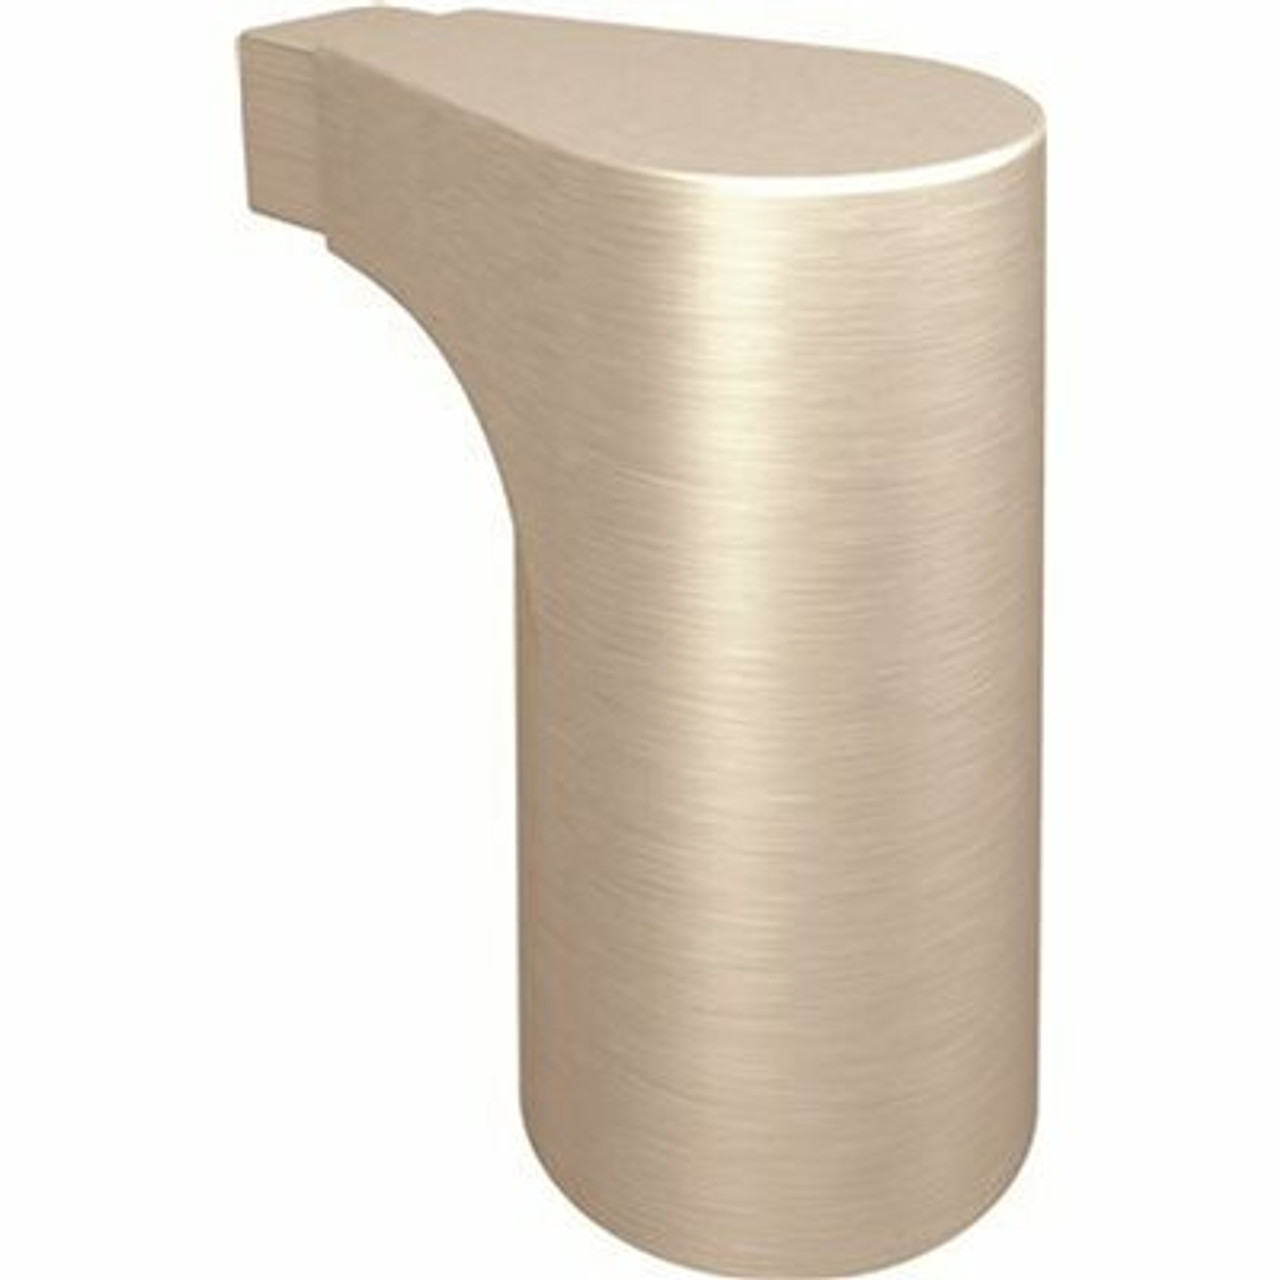 Cleveland Faucet Group Edgestone Towel Bar Mounting Post In Brushed Nickel